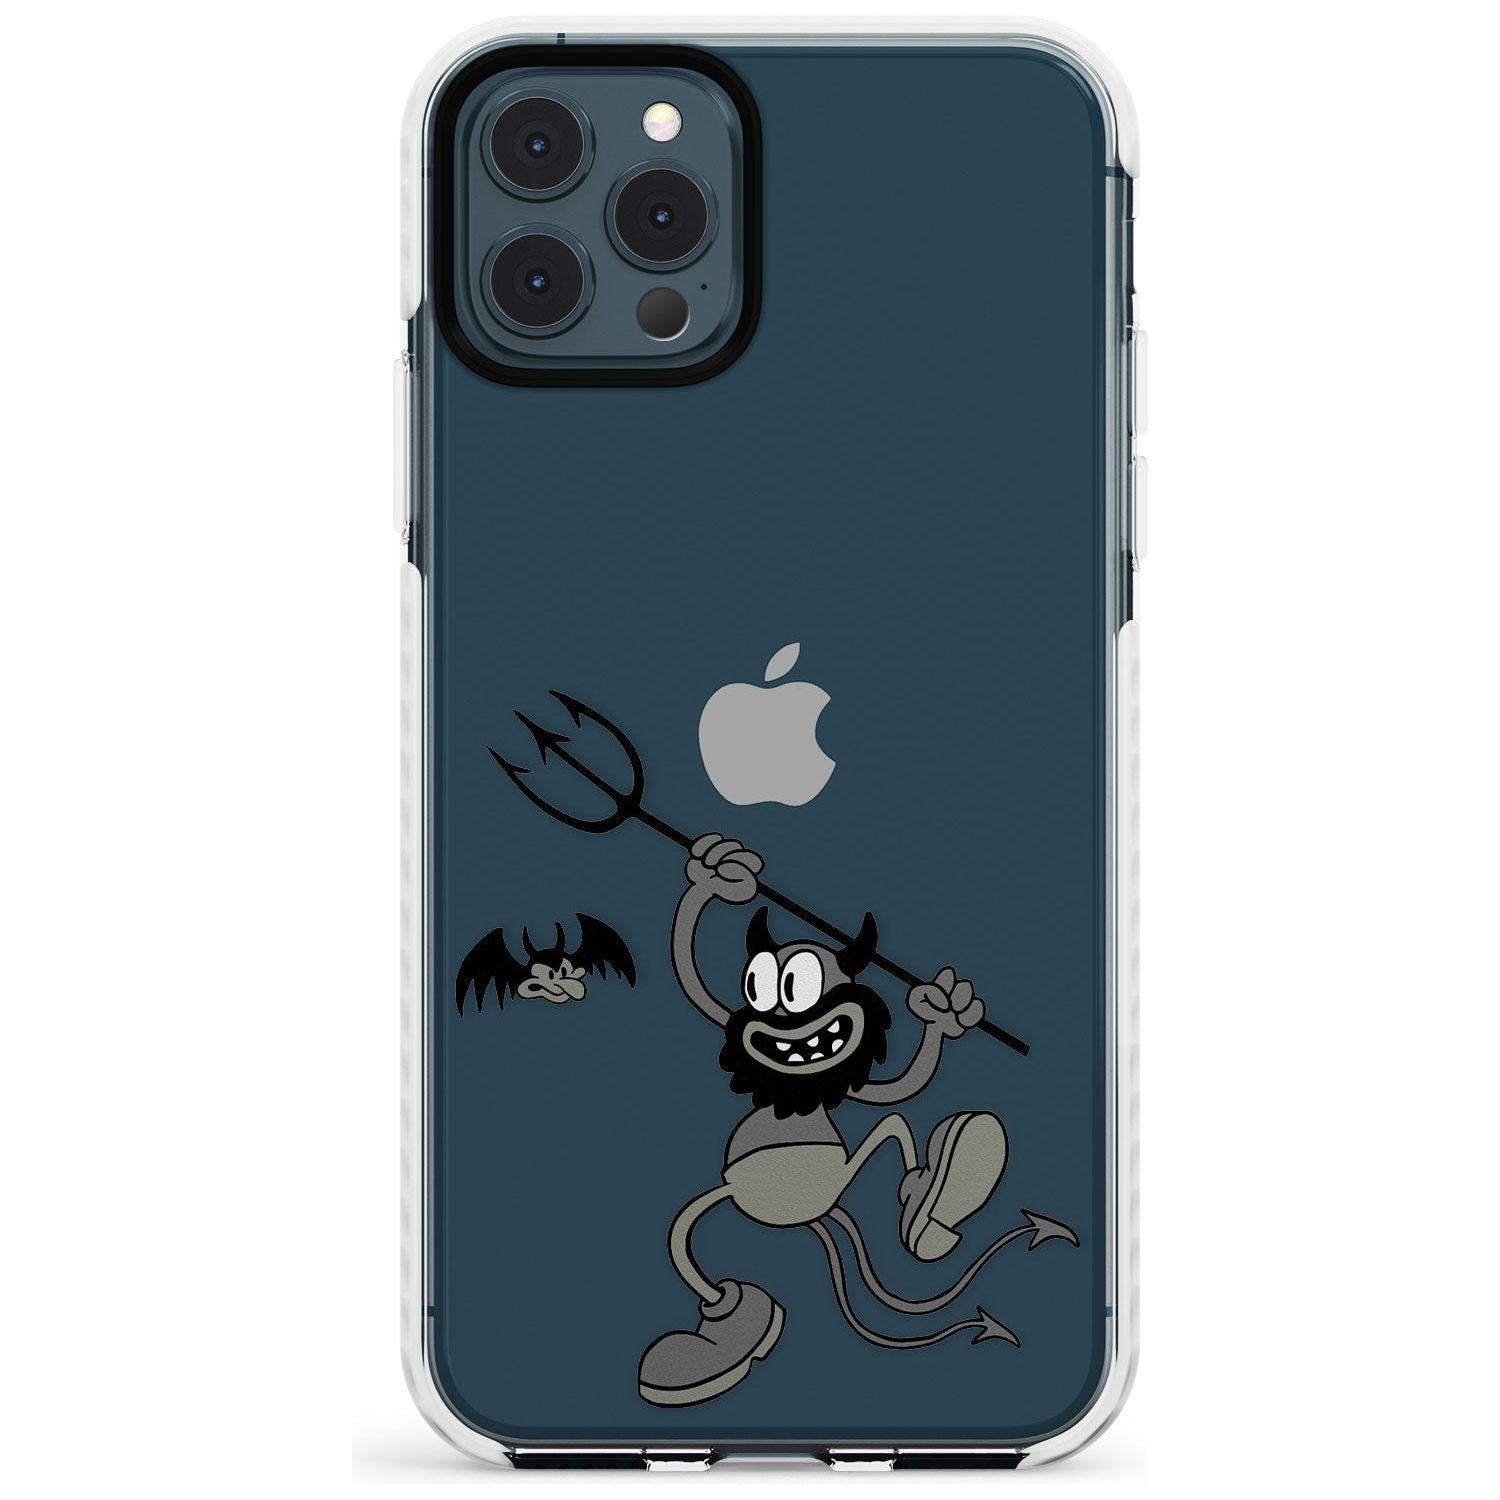 Dancing Devil Impact Phone Case for iPhone 11 Pro Max